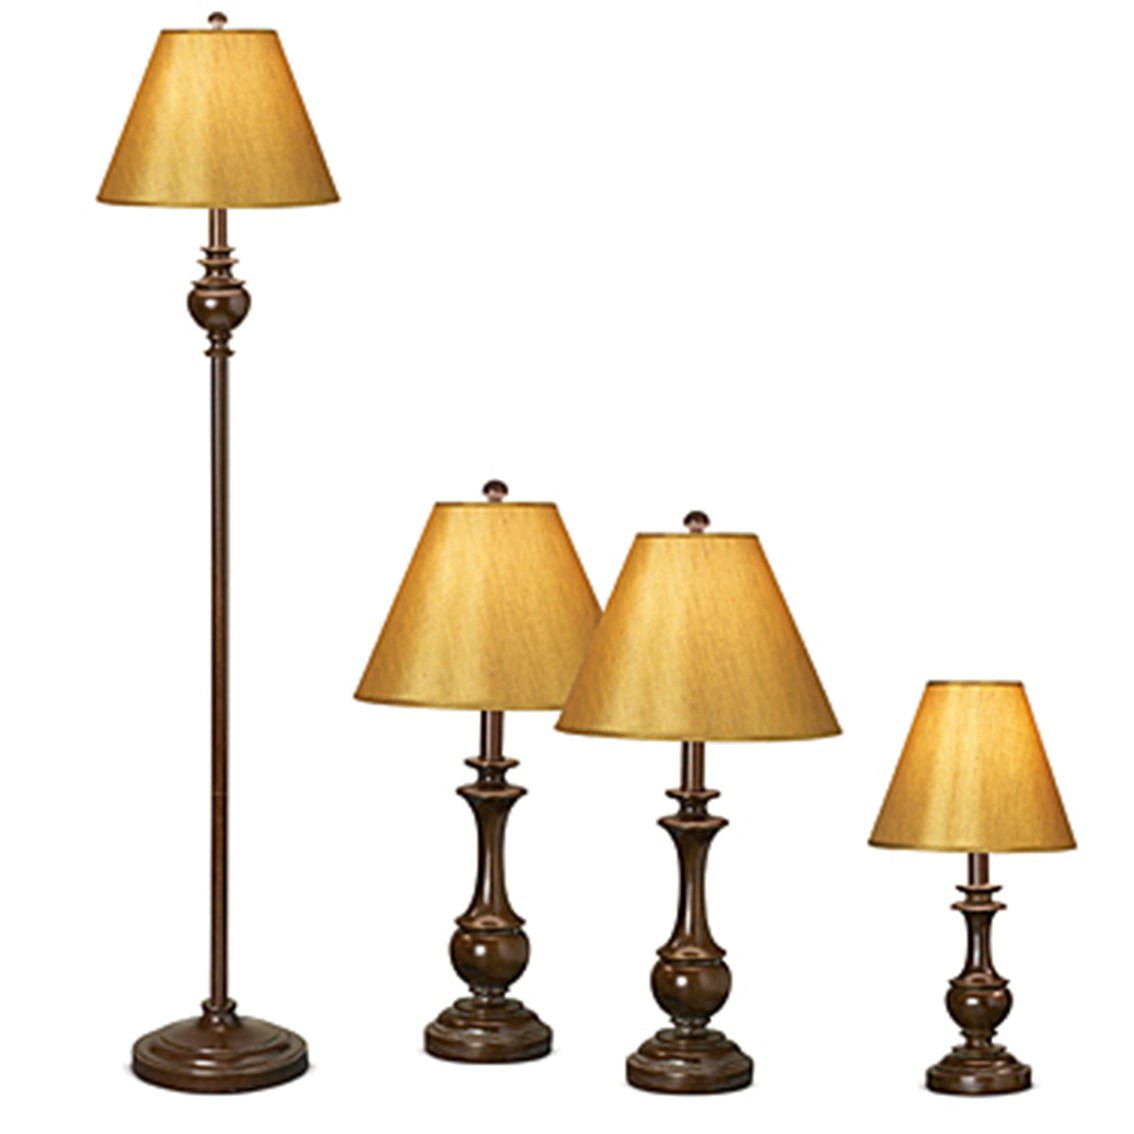 Essentials Devon 4 Piece Table Lamp and Floor Lamp Set with Empire Shade